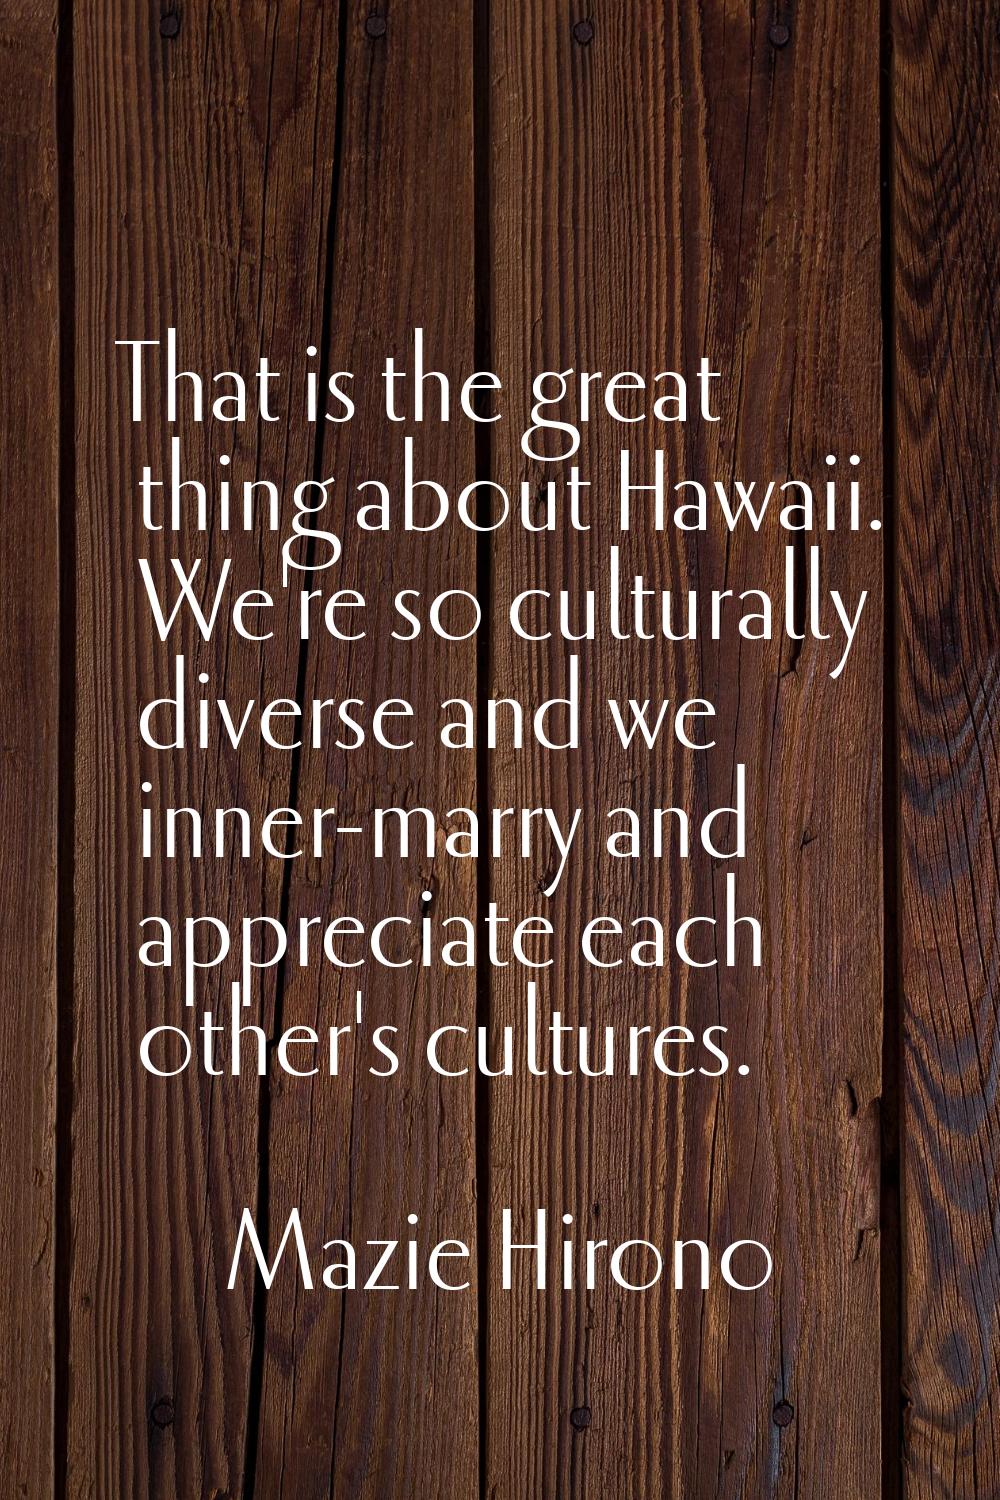 That is the great thing about Hawaii. We're so culturally diverse and we inner-marry and appreciate